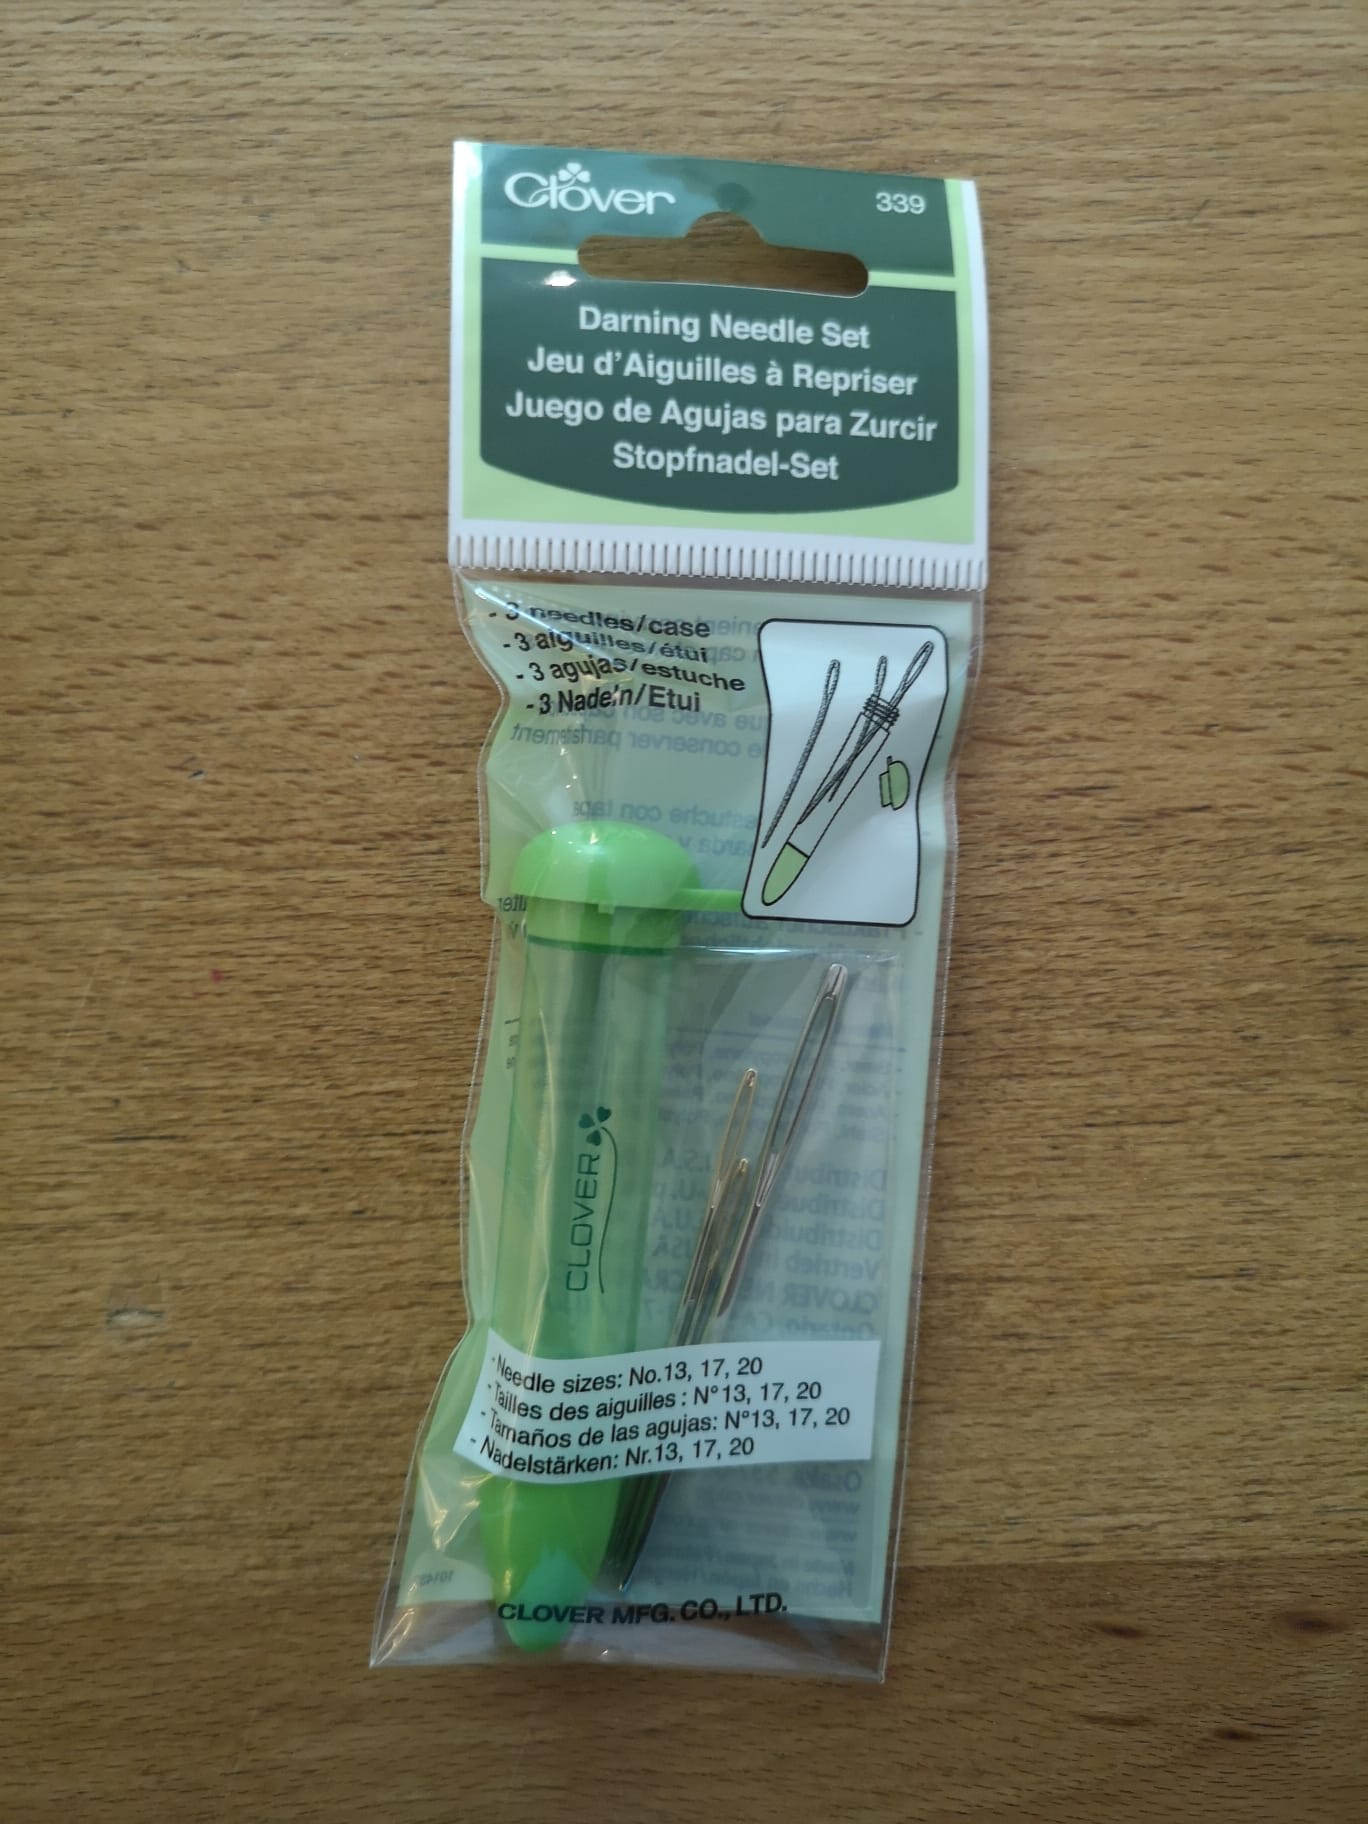 The darning needle set, featuring 3 different sizes needles. It comes with a green plastic cylindrical case. 